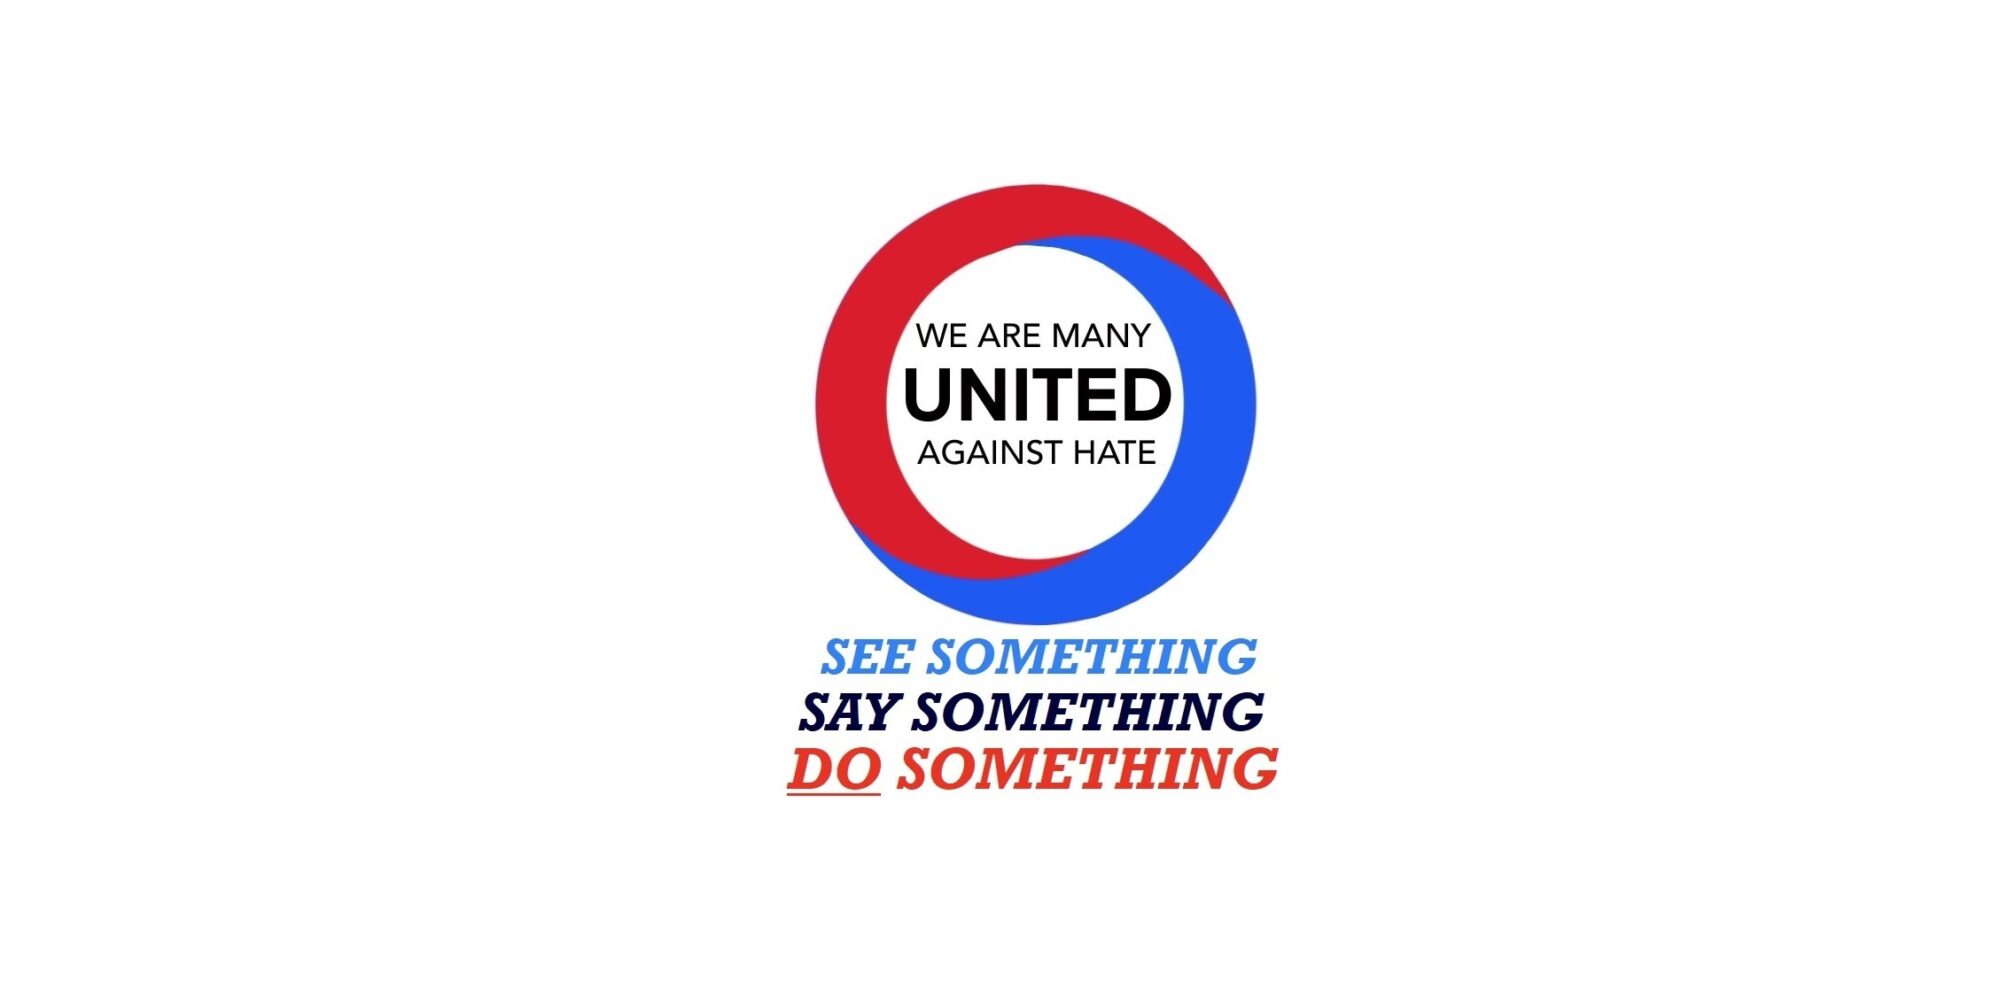 We Are Many - United Against Hate